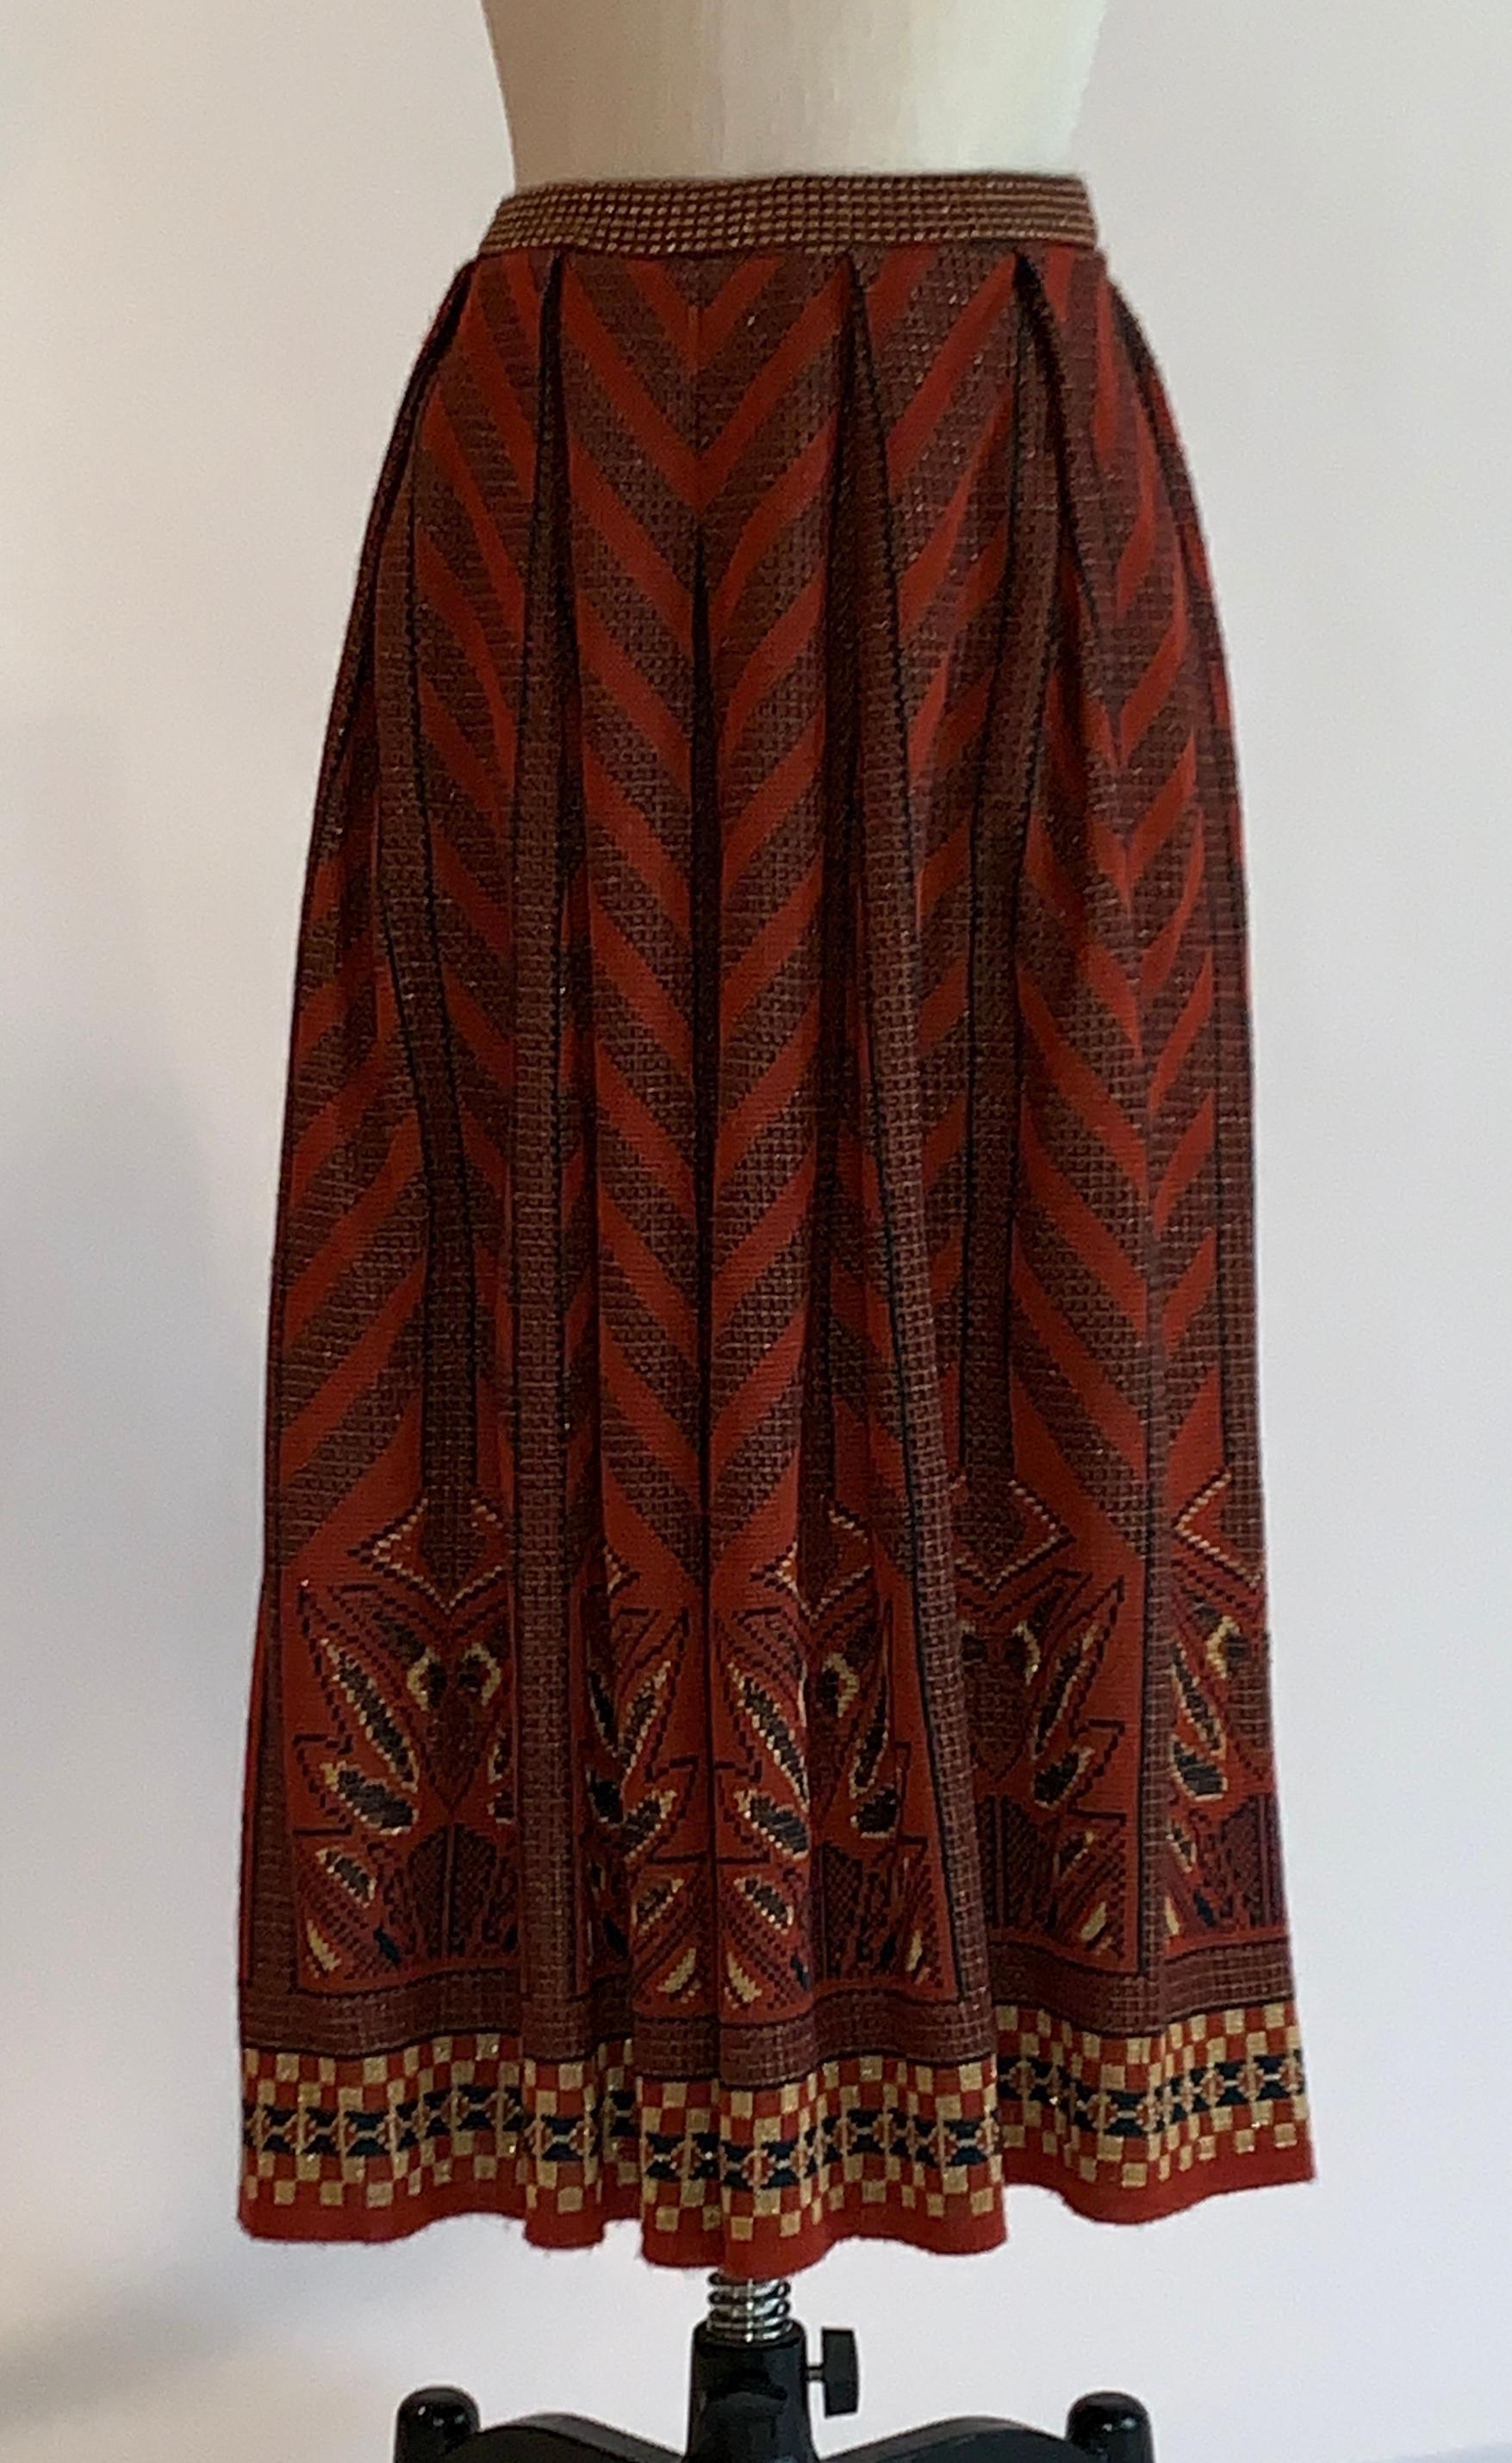 Bill Gibb for Homes and Gardens vintage 1970s knit skirt featuring geometric pattern in shades of maroon, black, metallic gold, and green. Pull on style with elastic waist. 

95% acrylic, 5% metallic.

Made in England. 

Labelled UK size 18